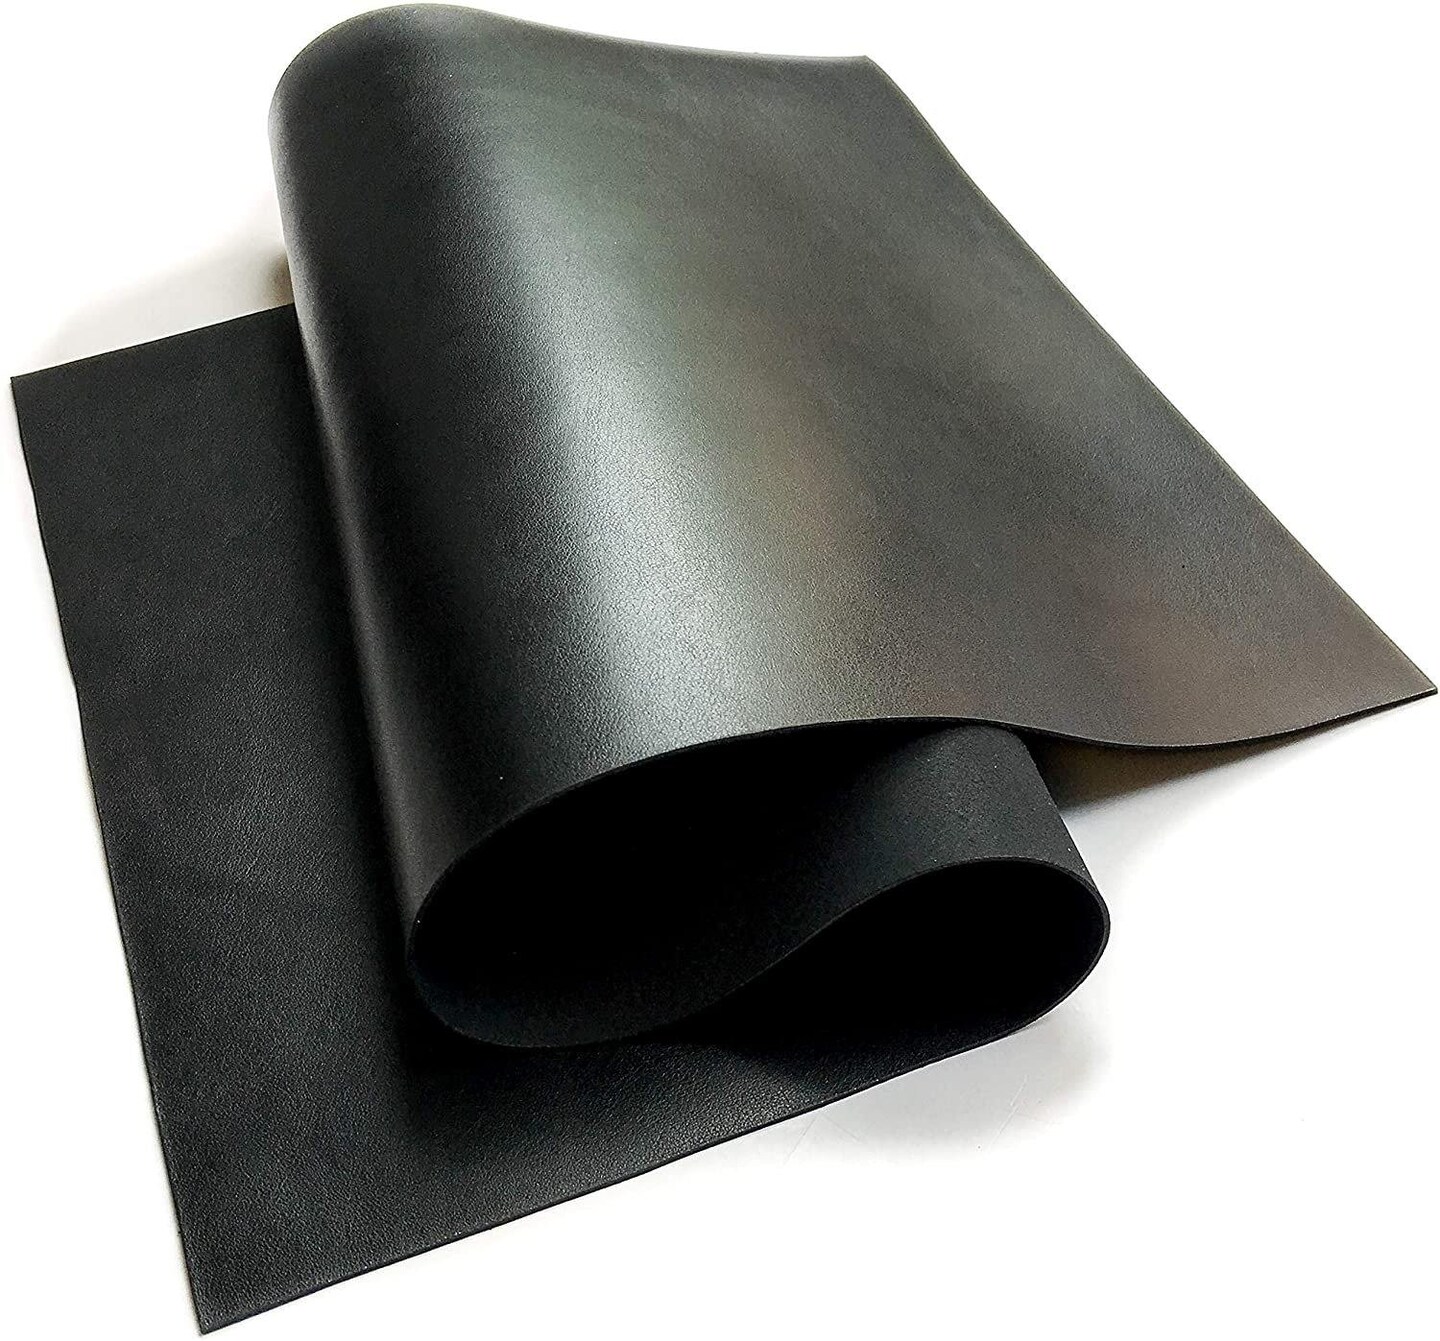 Black Genuine Leather for Crafts: Real Black Lambskin Leather Sheet for  Crafting, Sewing and Personalized Leather Projects (Black, 8x10In/ 20x25cm)